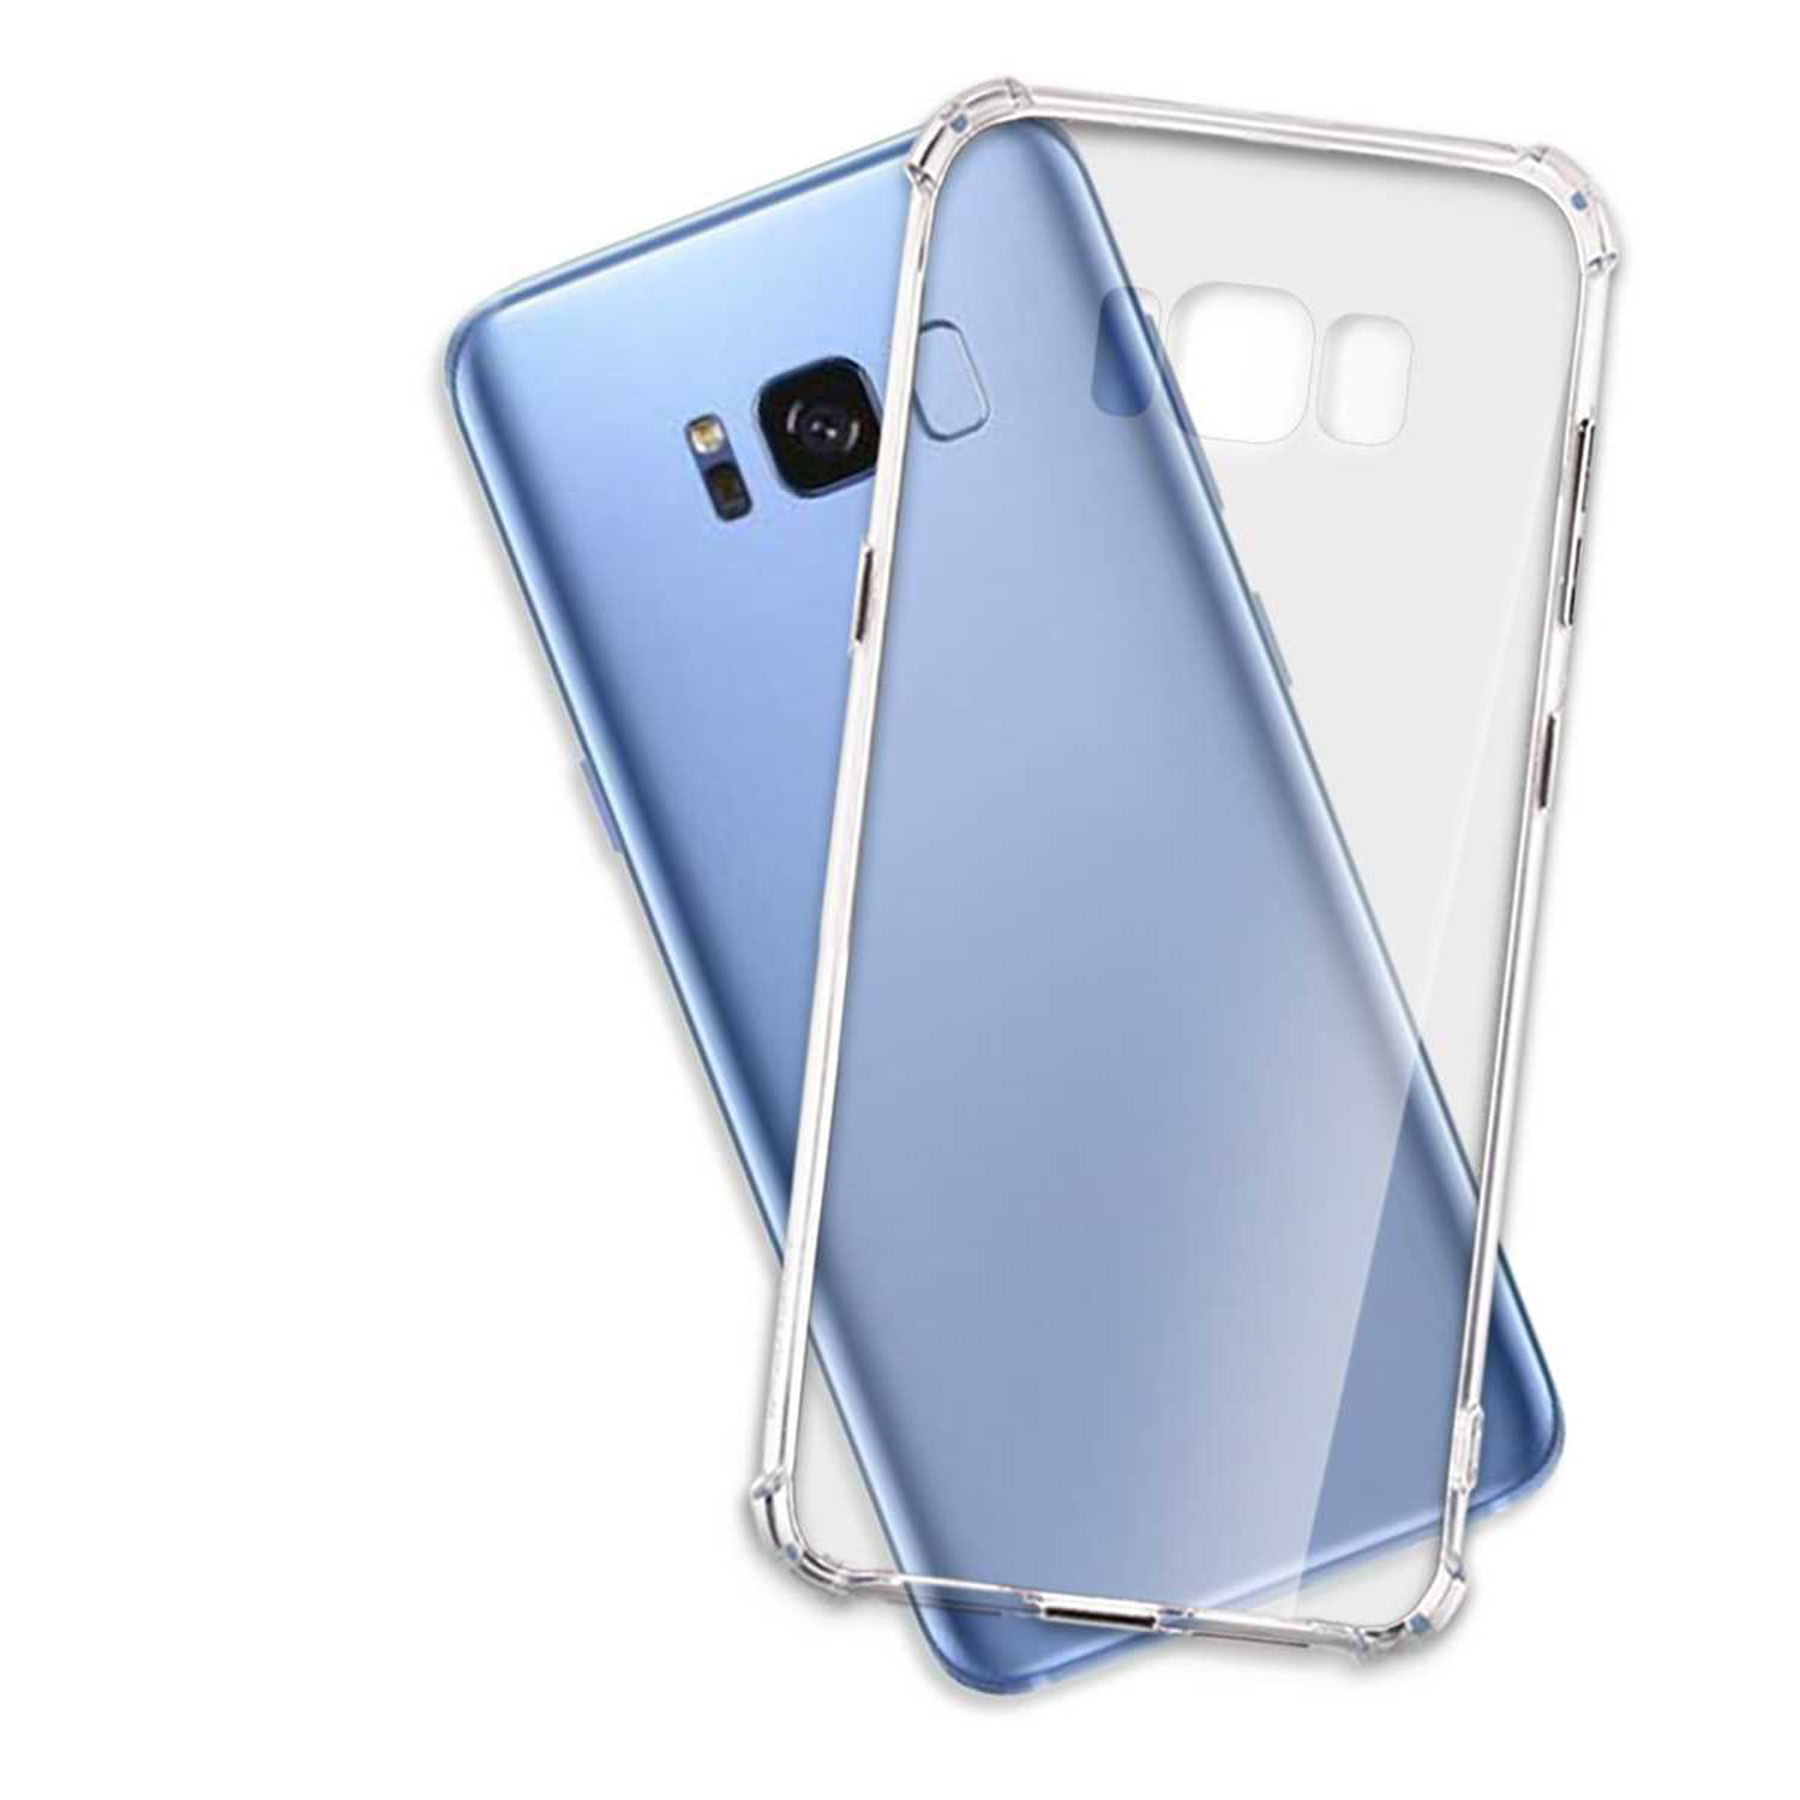 Galaxy S8, Transparent Clear MTB Armor Backcover, ENERGY Samsung, MORE Case,